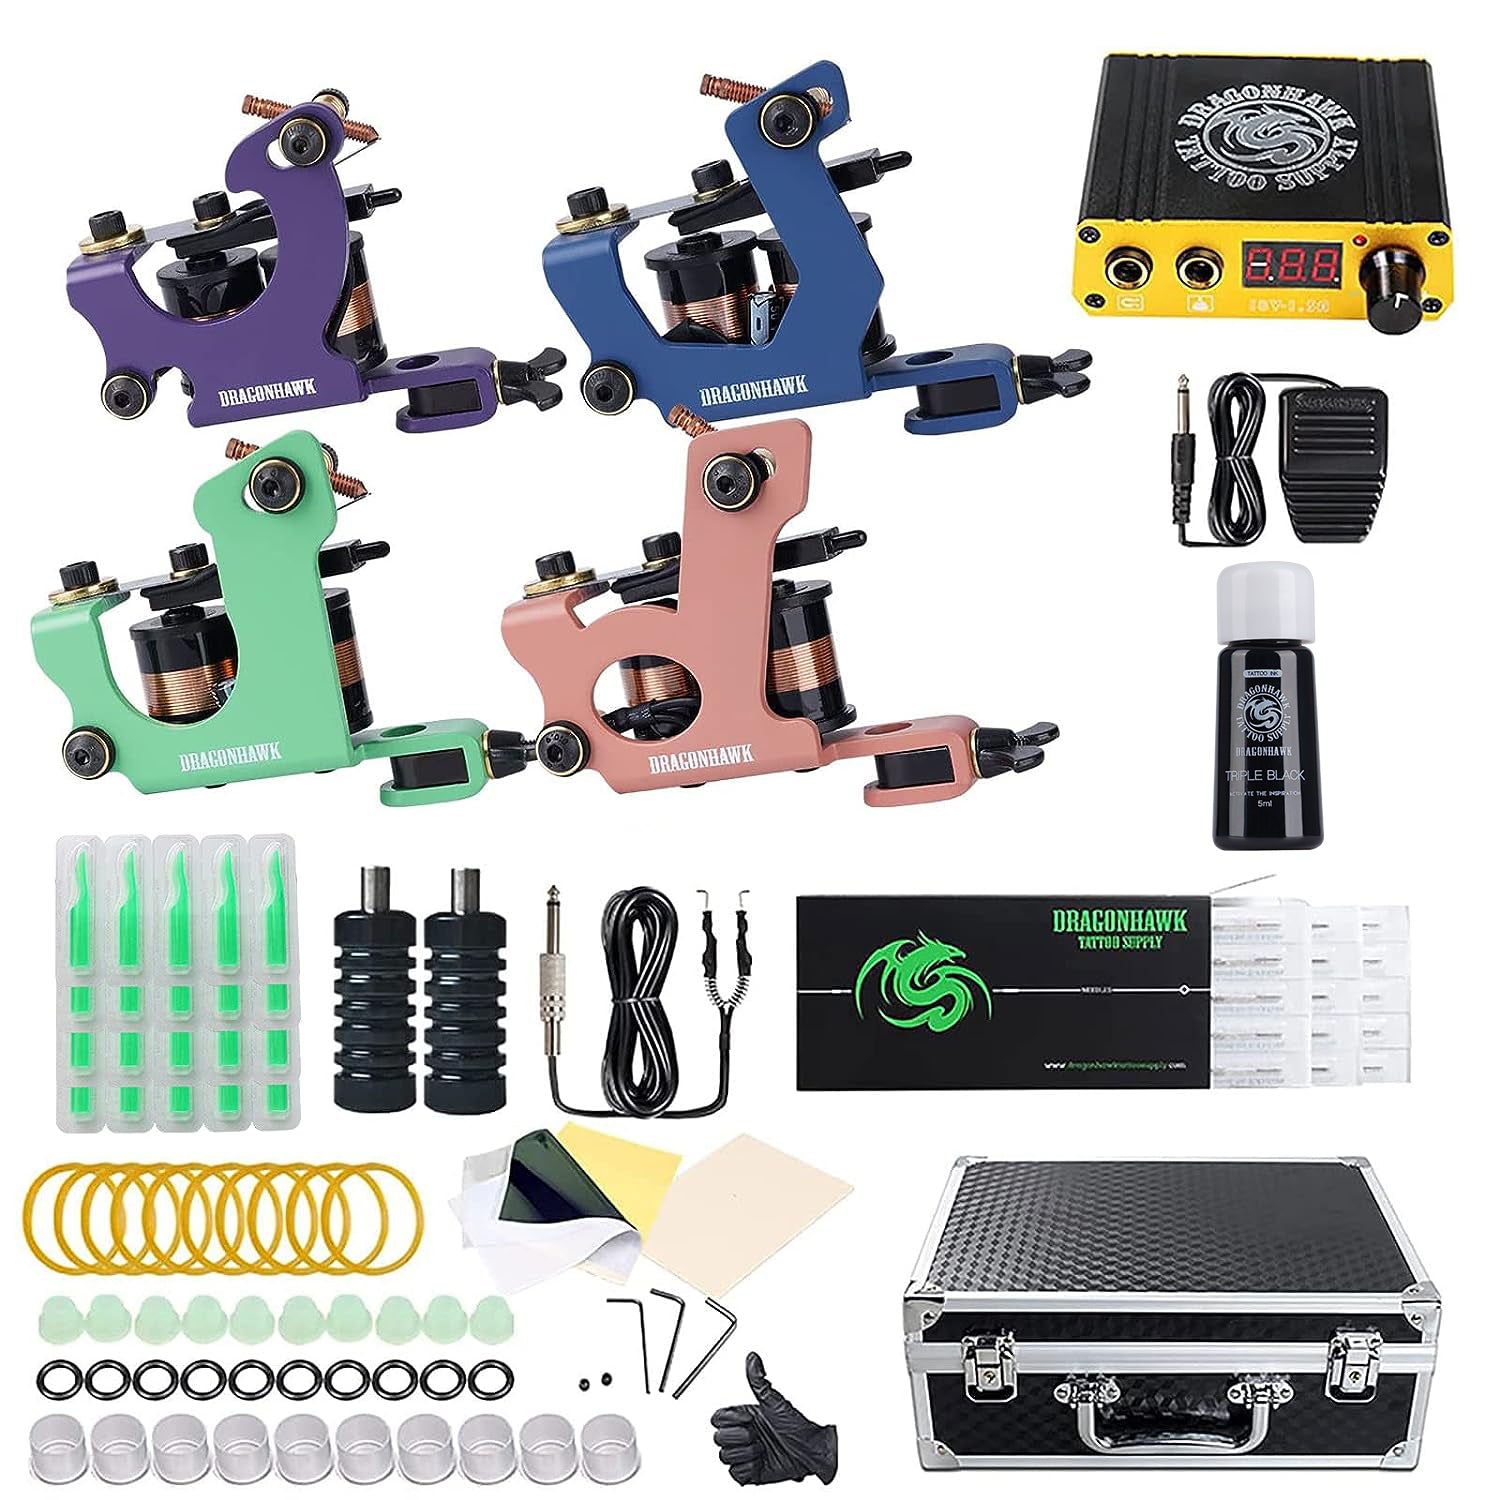 Tattoo Machine Complete Tattoo Machine Set Power Supply Tattoo Ink  Aftercare Cream Accessories Supplies Body DIY Art Design Professional Kit  230630 From Nan07, $25.17 | DHgate.Com